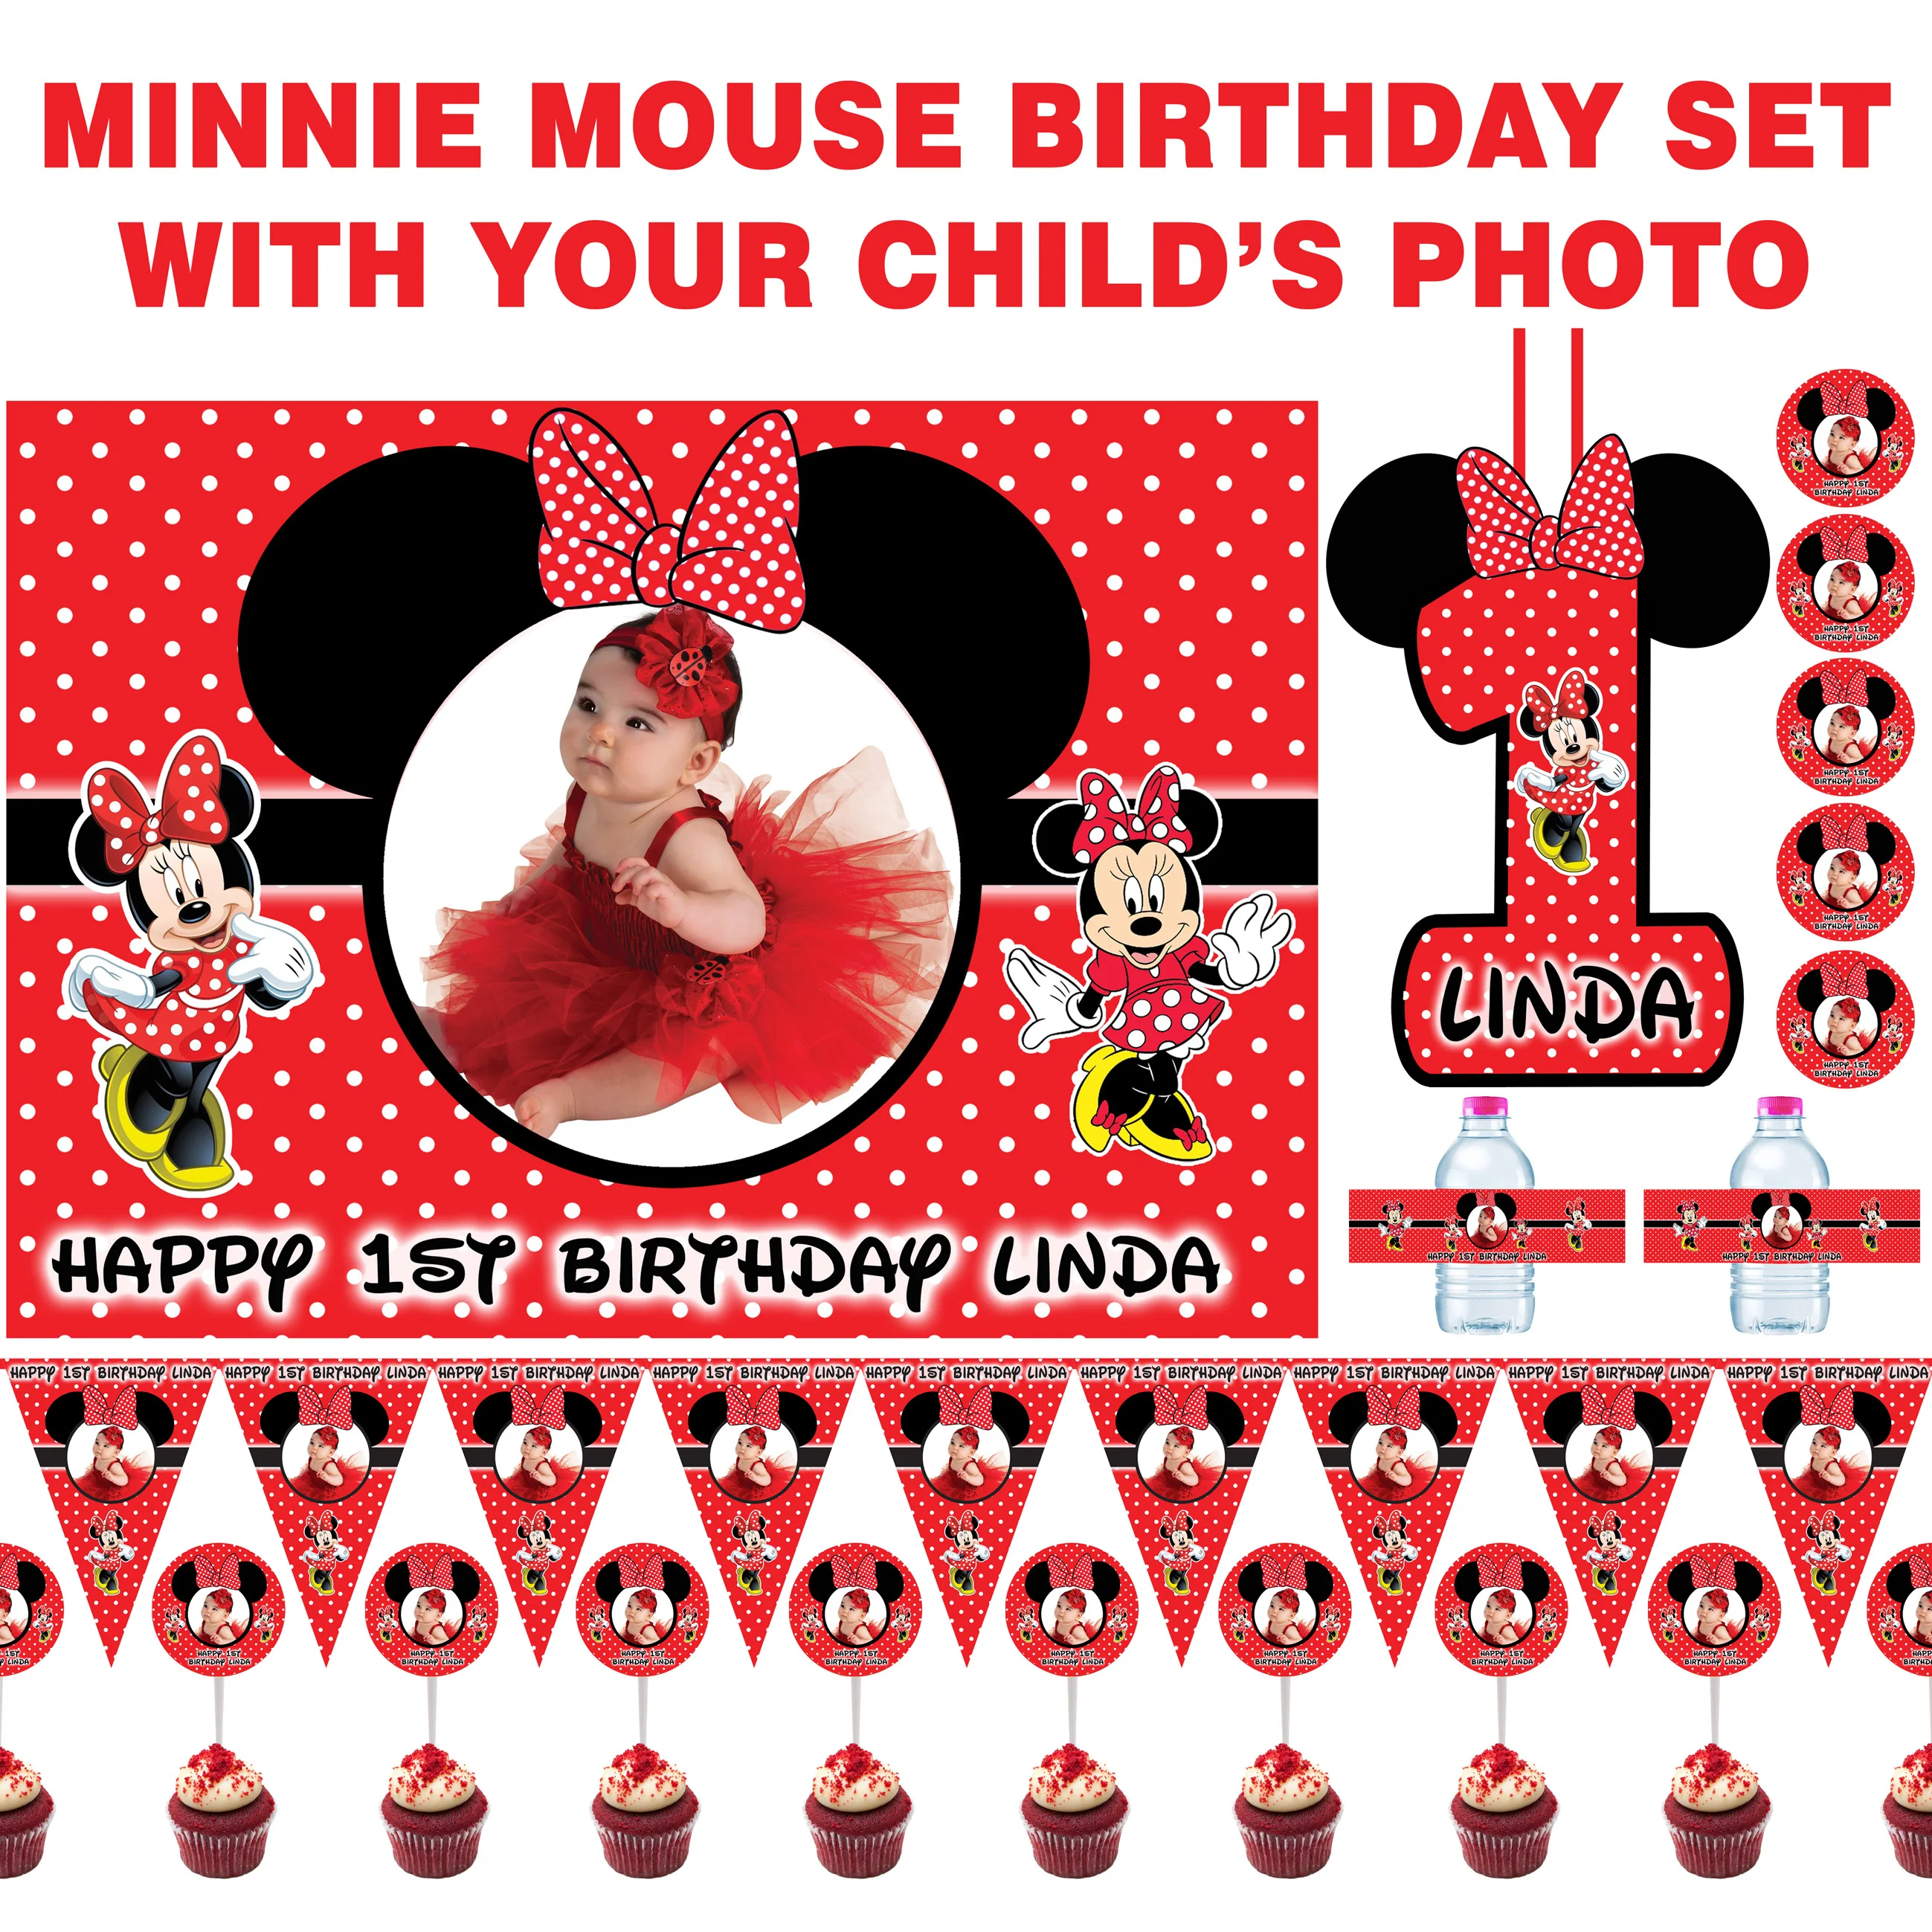 

Personalized Red Minnie Mouse Birthday Set photo background, banner, water bottle labels, cupcake toppers, stickers